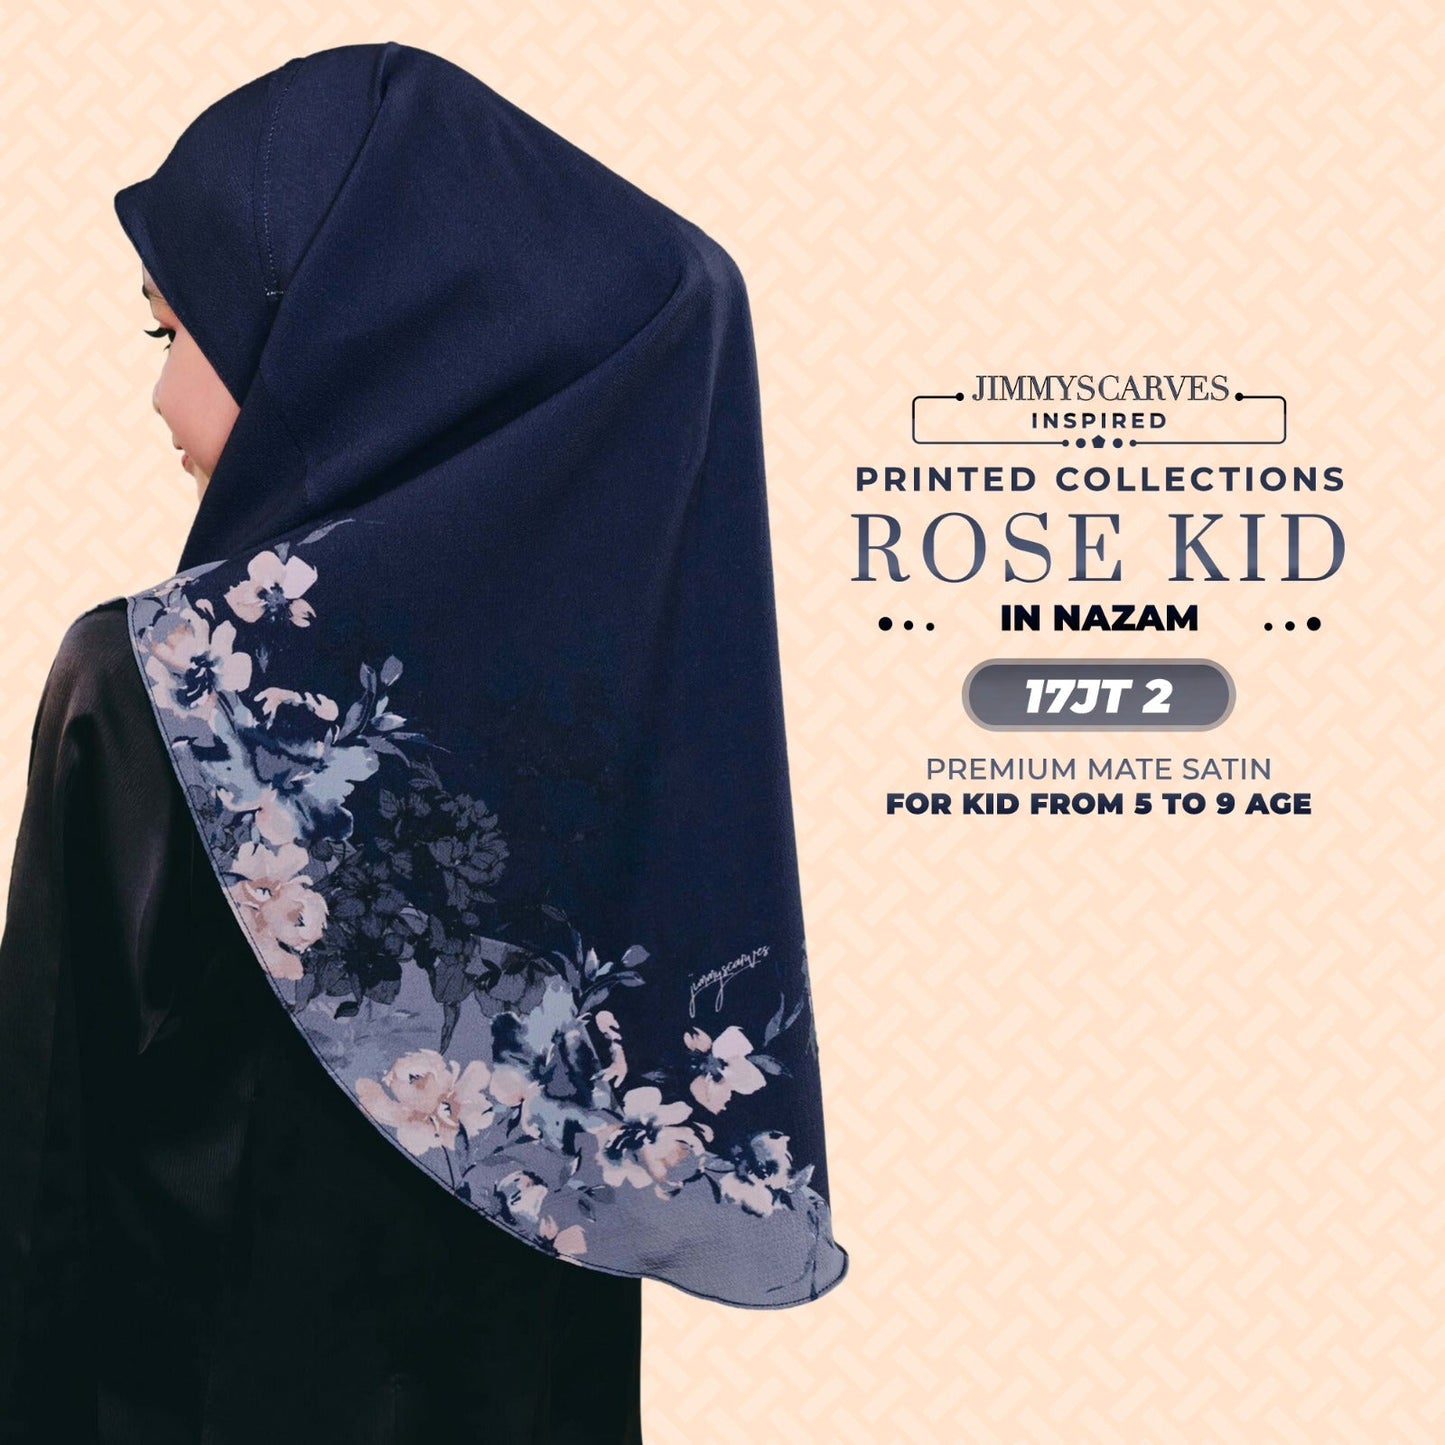 Jimmy Scarves Inspired Rose Printed Kid Instant Collection